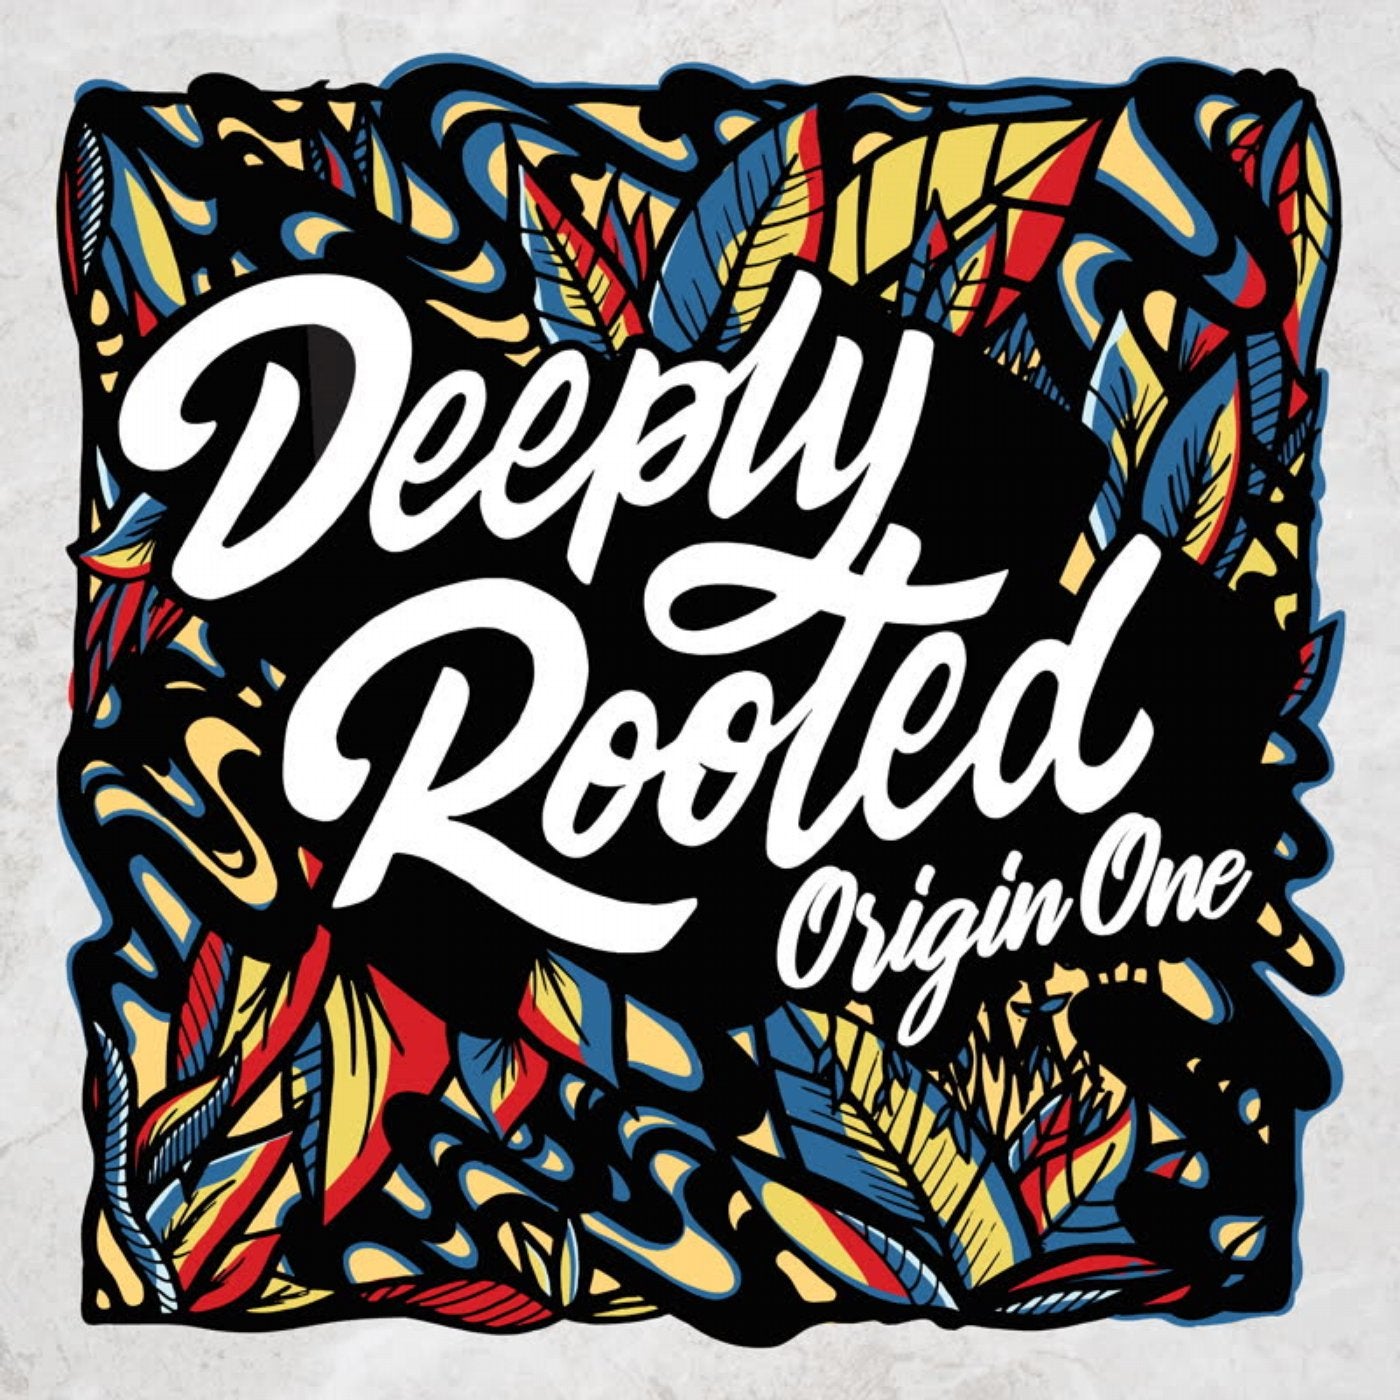 Origin first. Deeply Rooted. Soom t & disrupt – Dirty money. POPSY curious -- Youthman Mind.